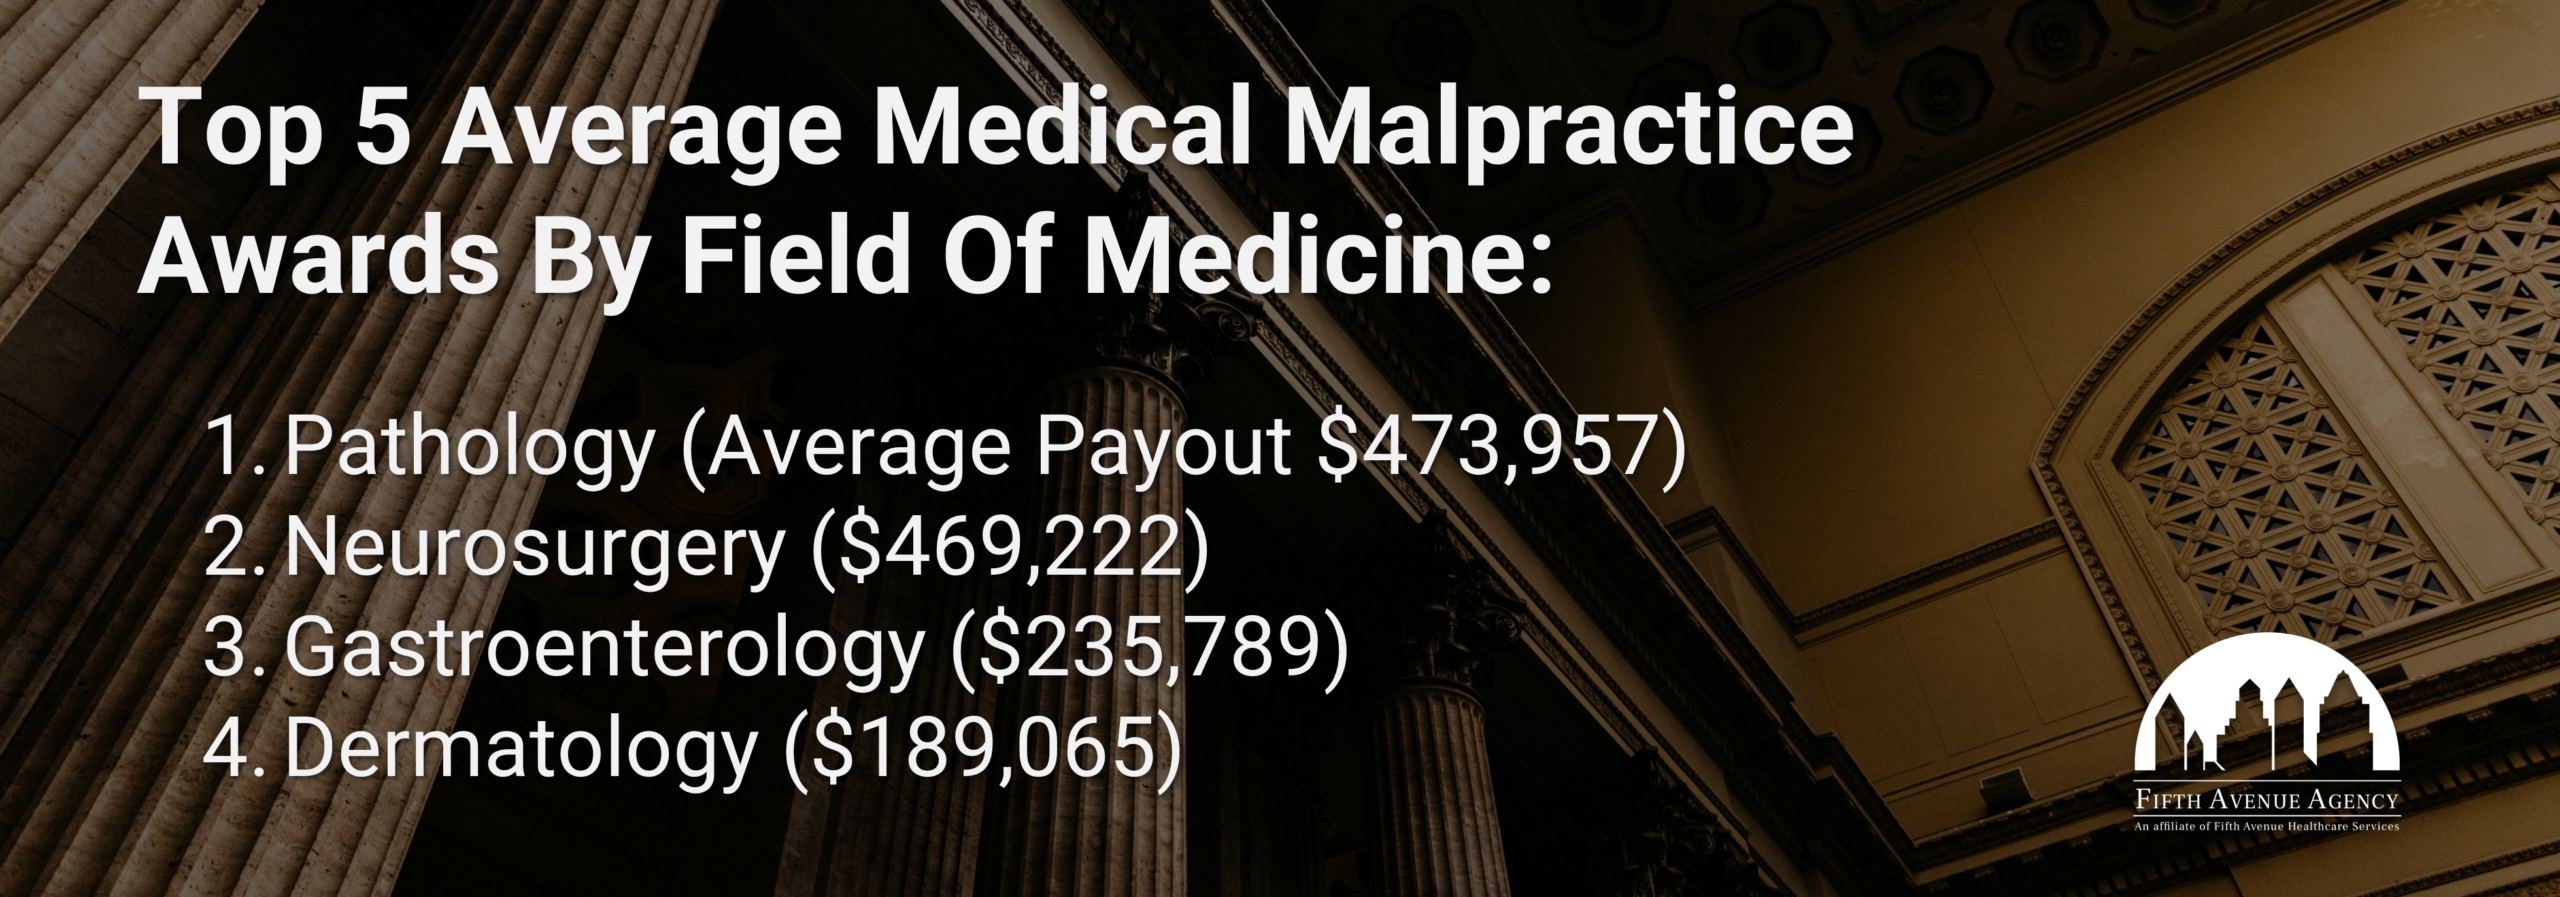 5 Top Average Medical Malpractice Awards By Specialty